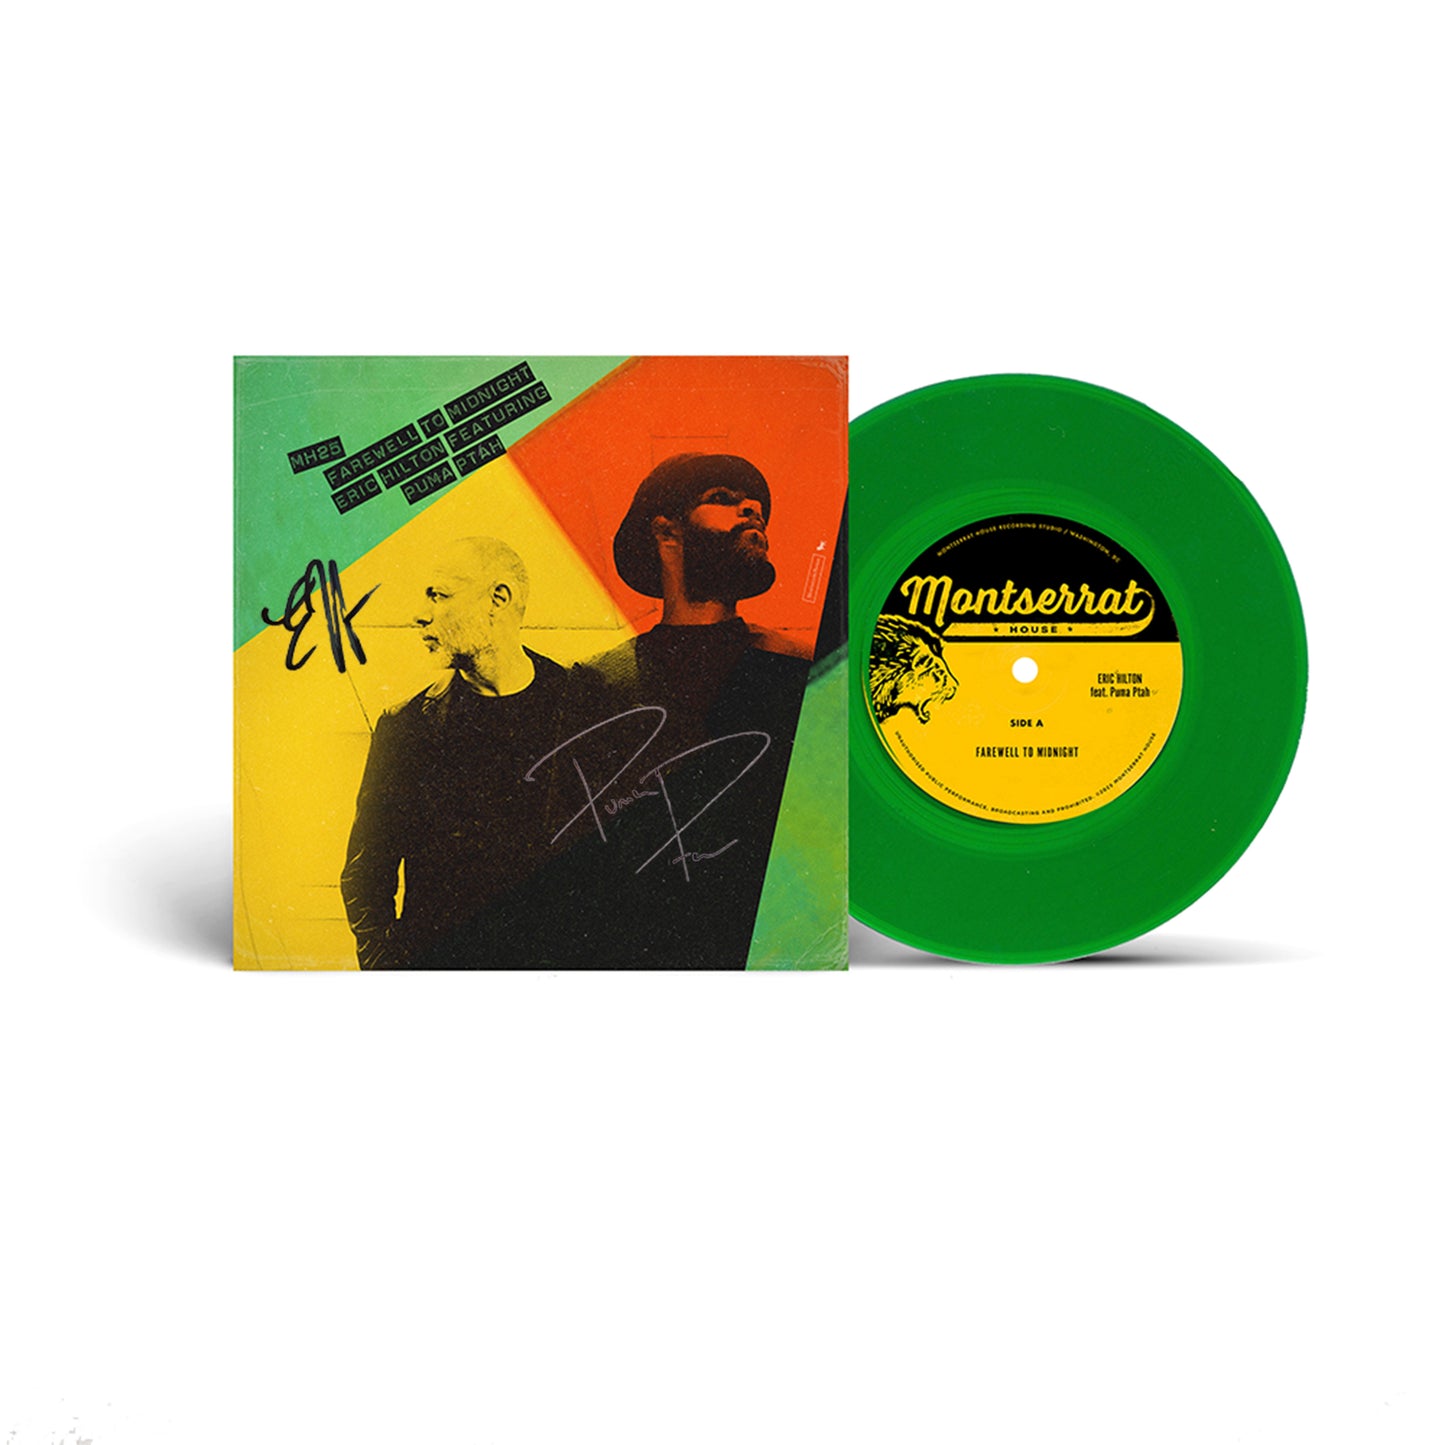 AUTOGRAPHED: Farewell to Midnight - 7" (Green) Vinyl (Signed by Eric and Puma)